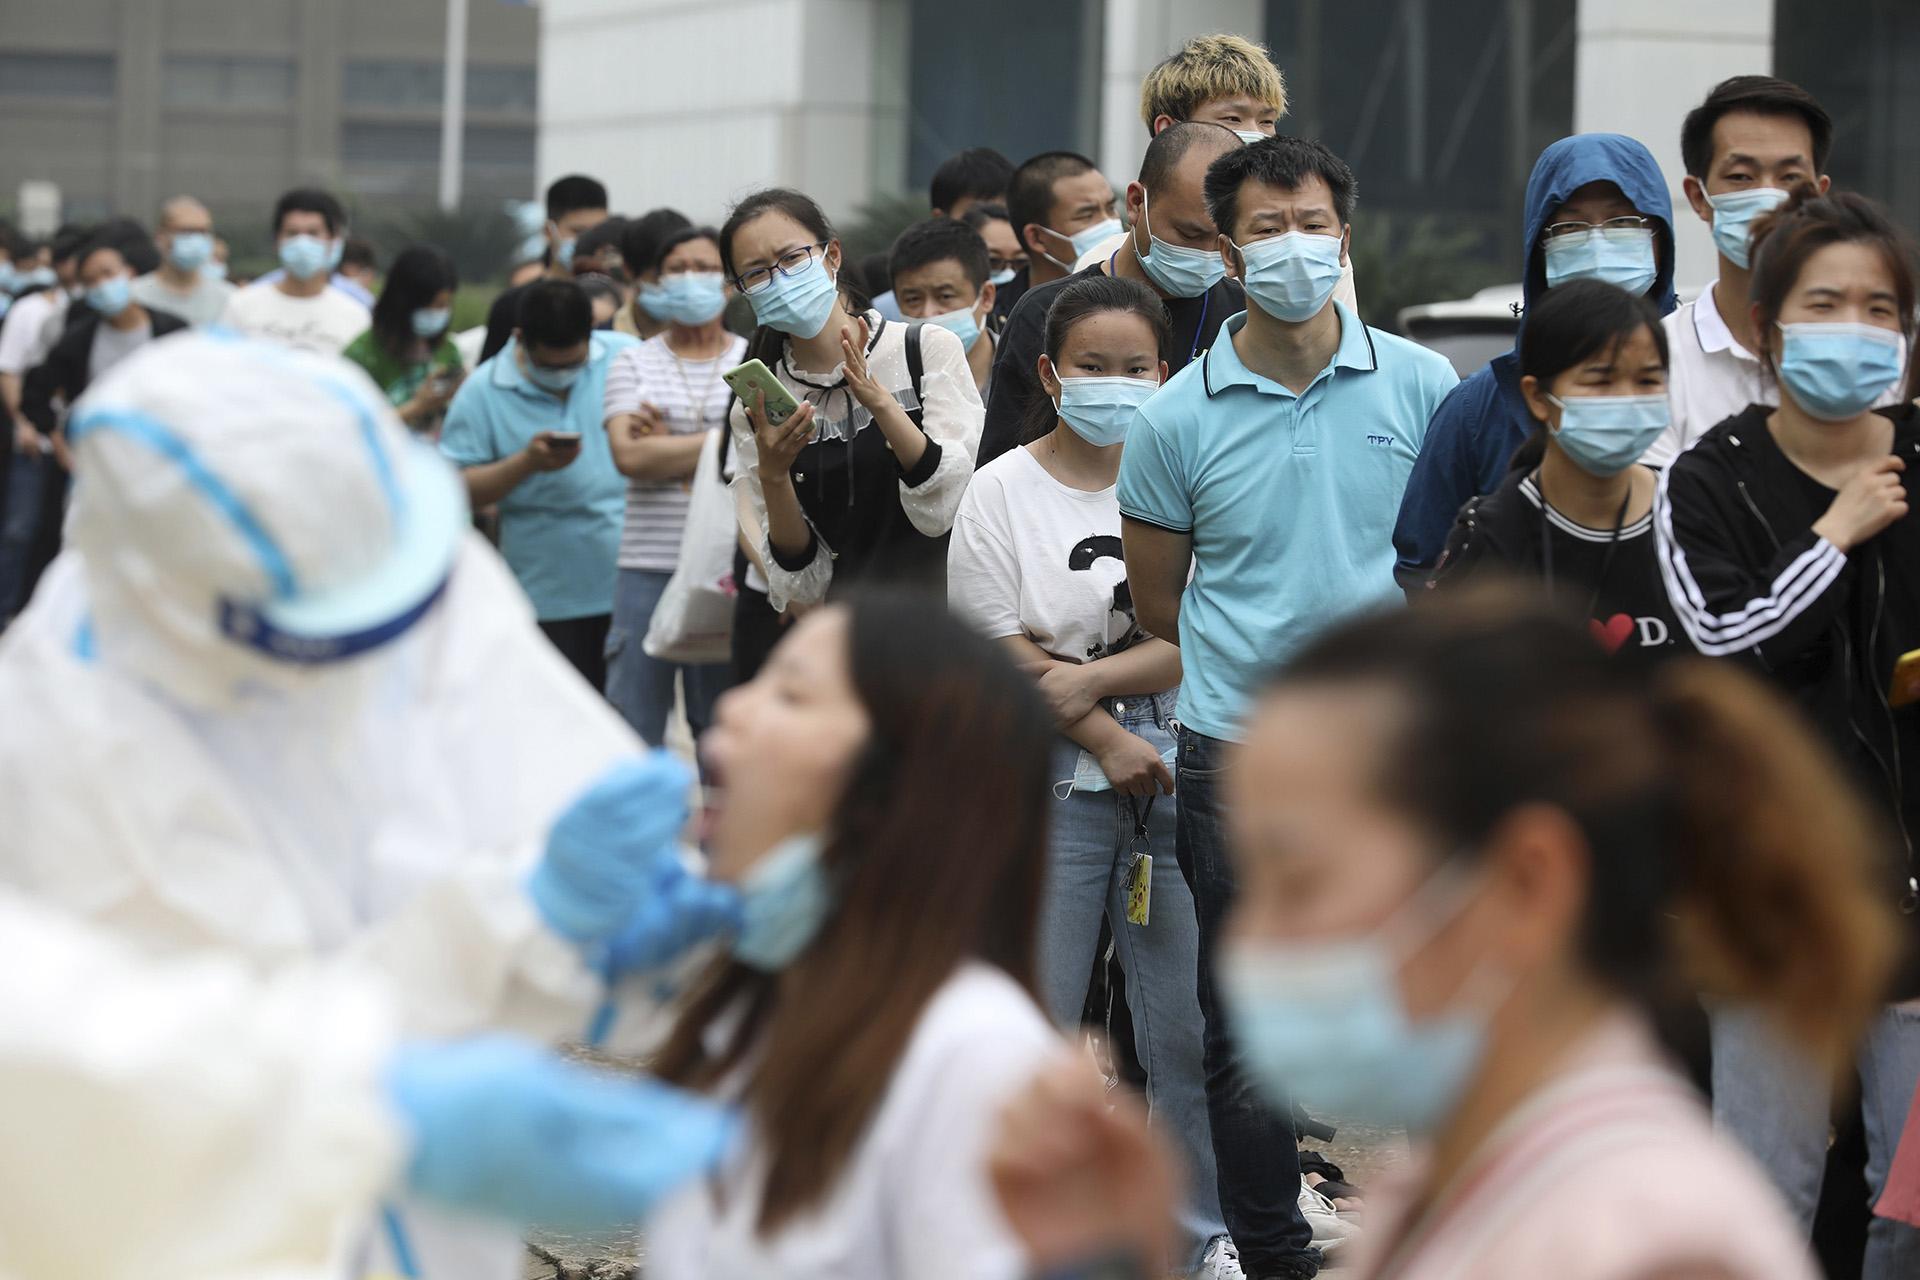 In this Friday, May 15, 2020 file photo, people line up for coronavirus testing at a large factory in Wuhan in central China's Hubei province. In June 2020, China reported using batch testing as part of a recent campaign to test all 11 million residents of Wuhan, the city where the virus first emerged late in late 2019. (Chinatopix Via AP)